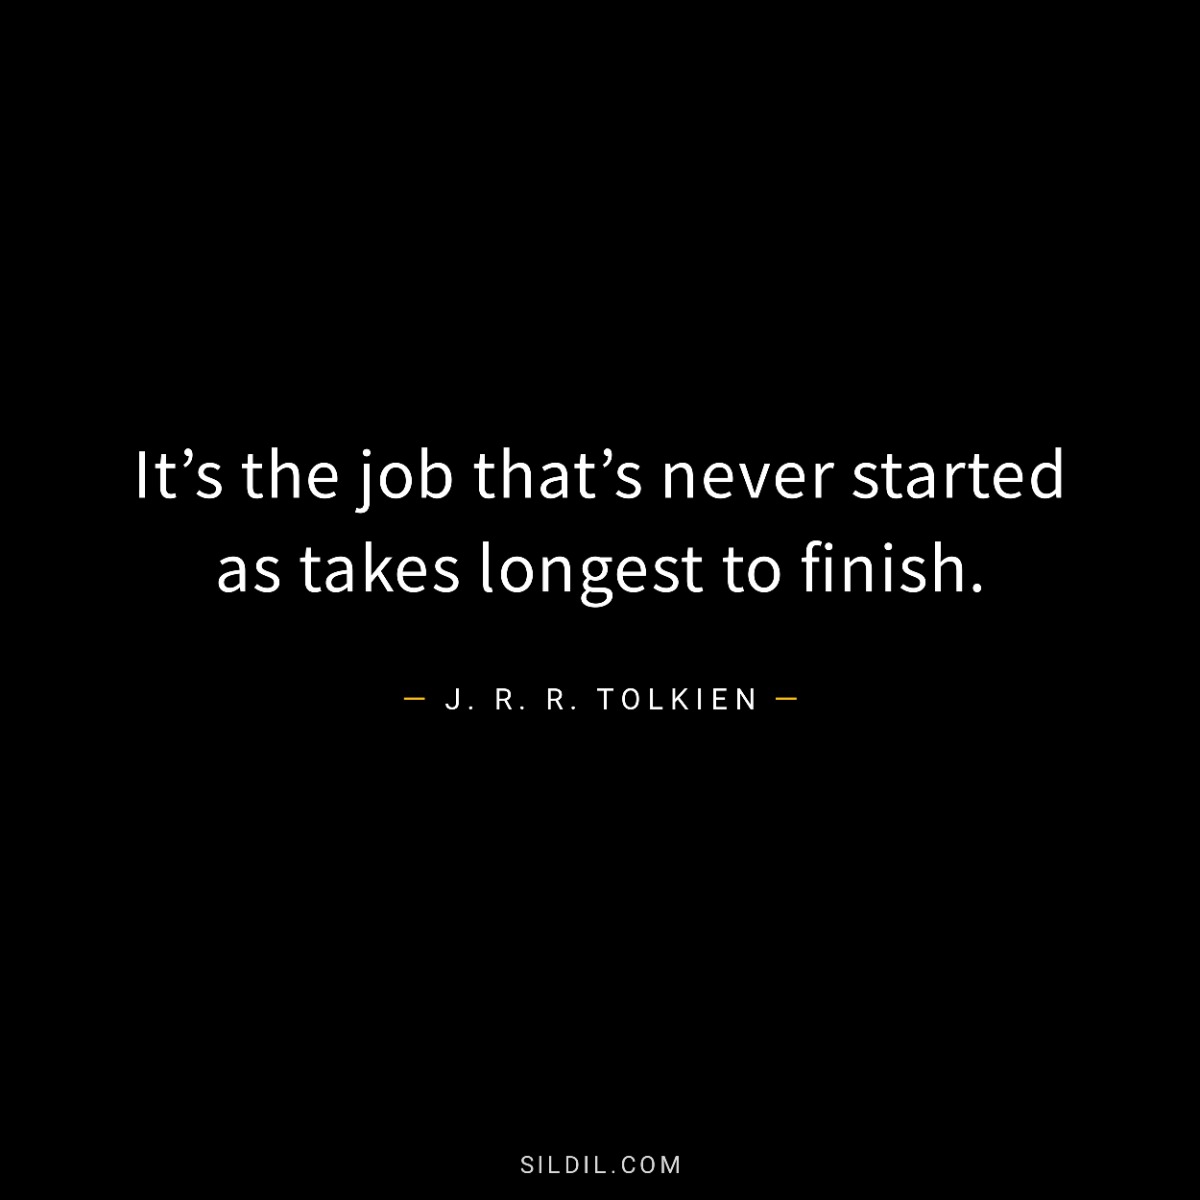 It’s the job that’s never started as takes longest to finish.